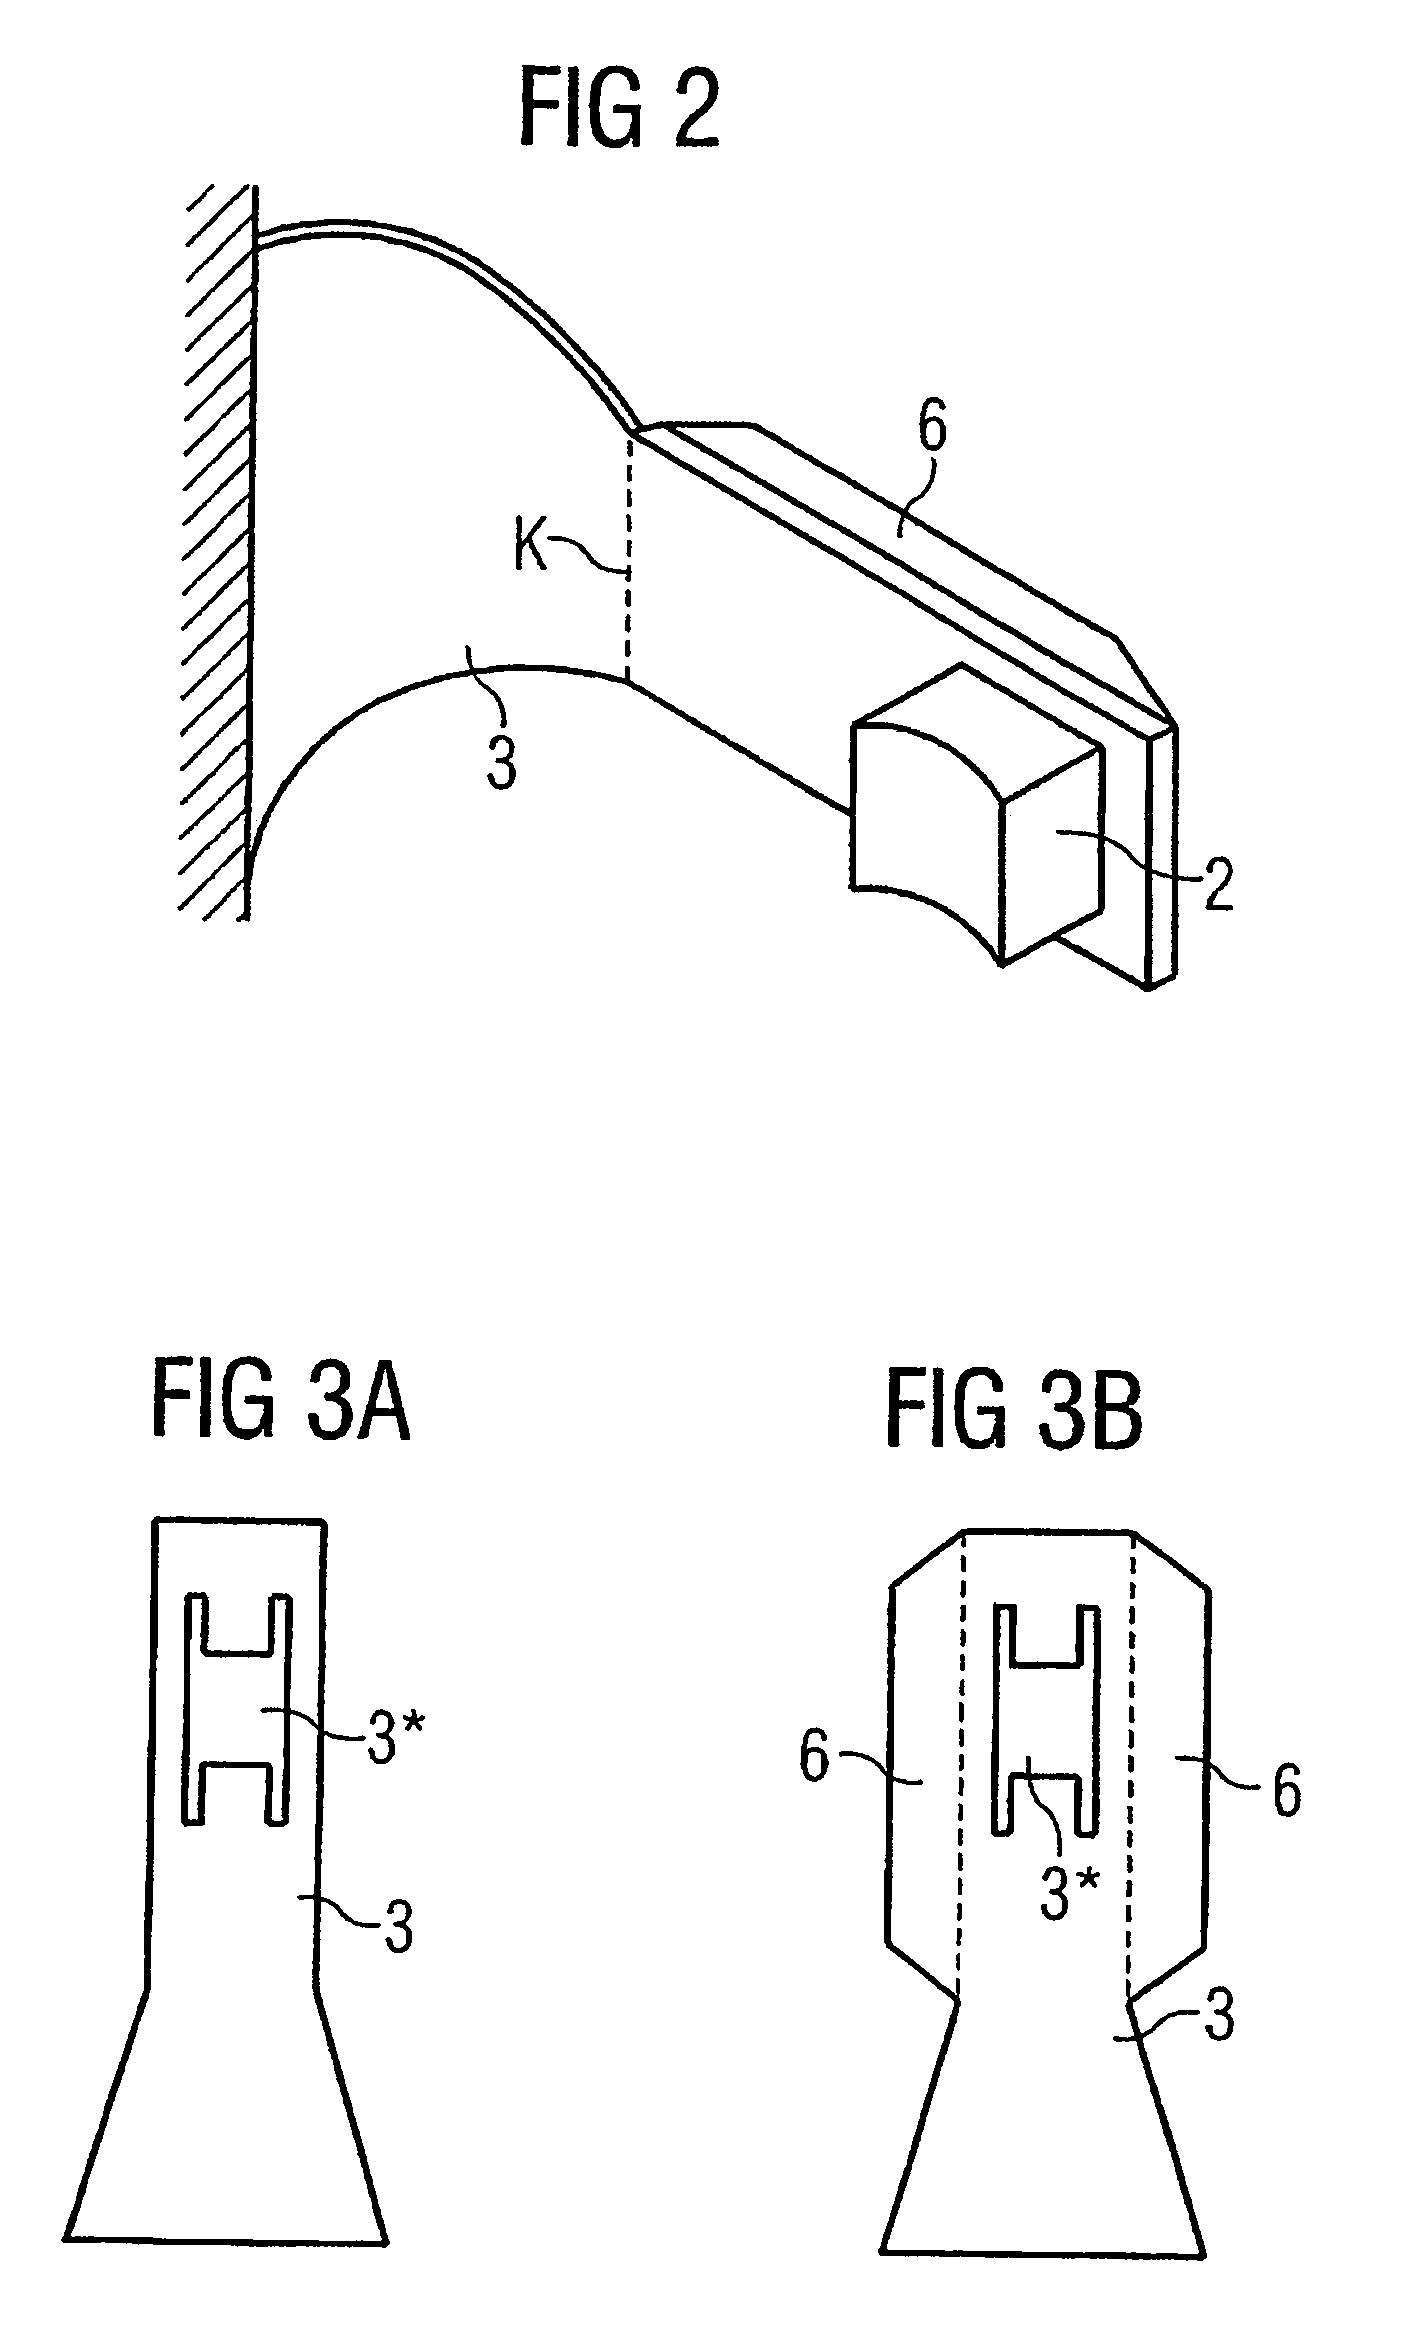 Mount part for commutator brushes of an electric motor